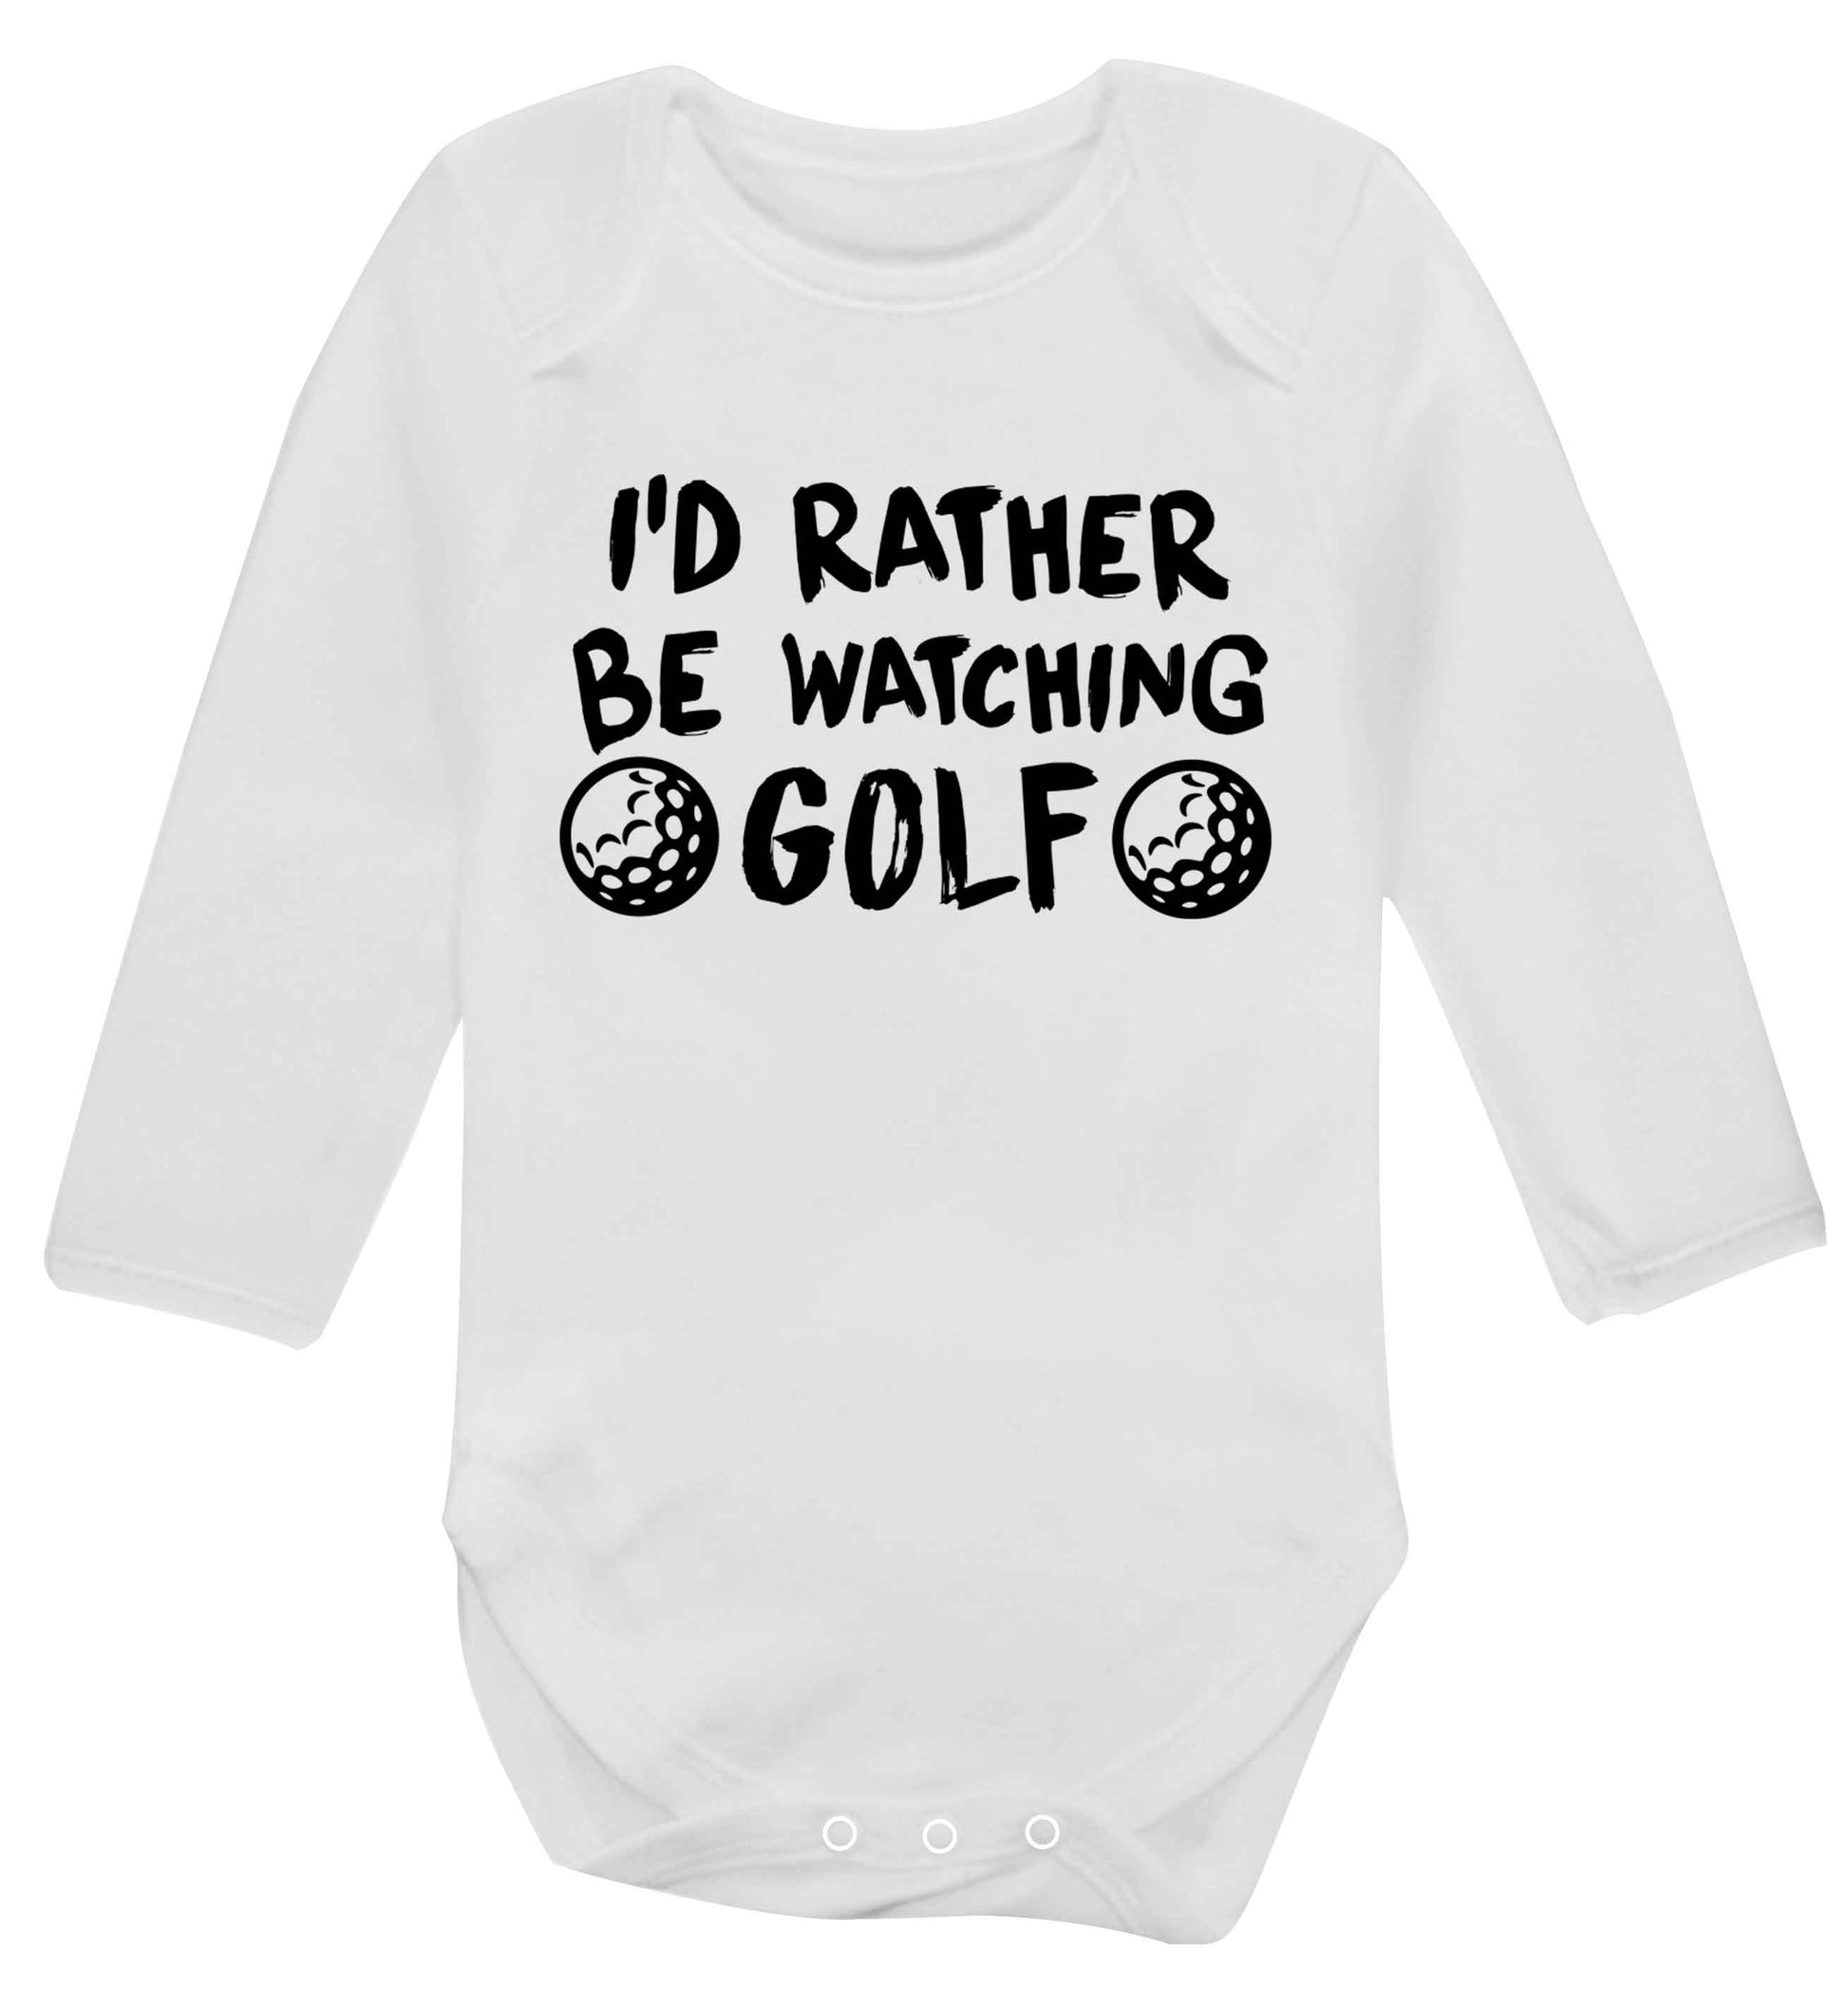 I'd rather be watching golf Baby Vest long sleeved white 6-12 months